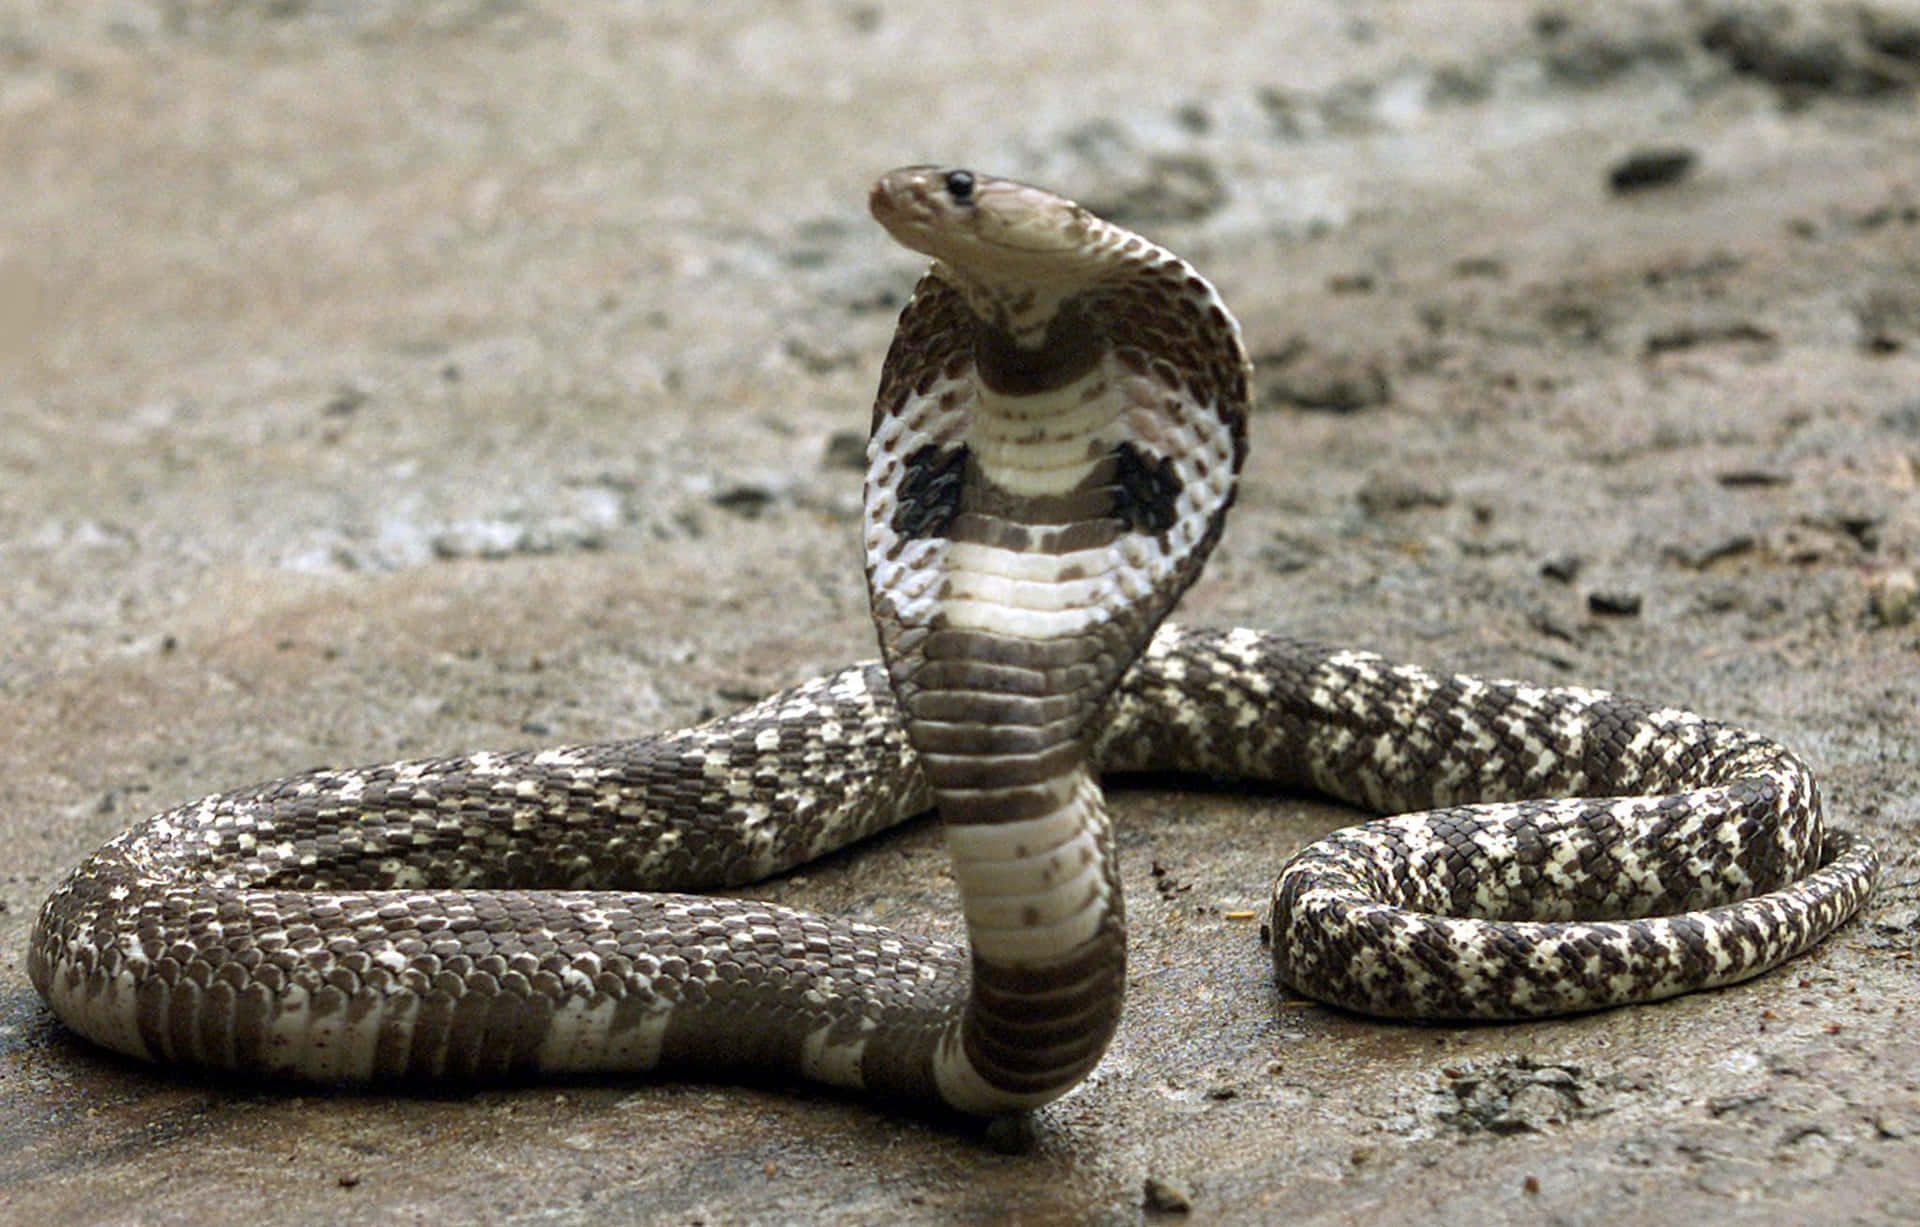 Magnificent King Cobra coiled to strike